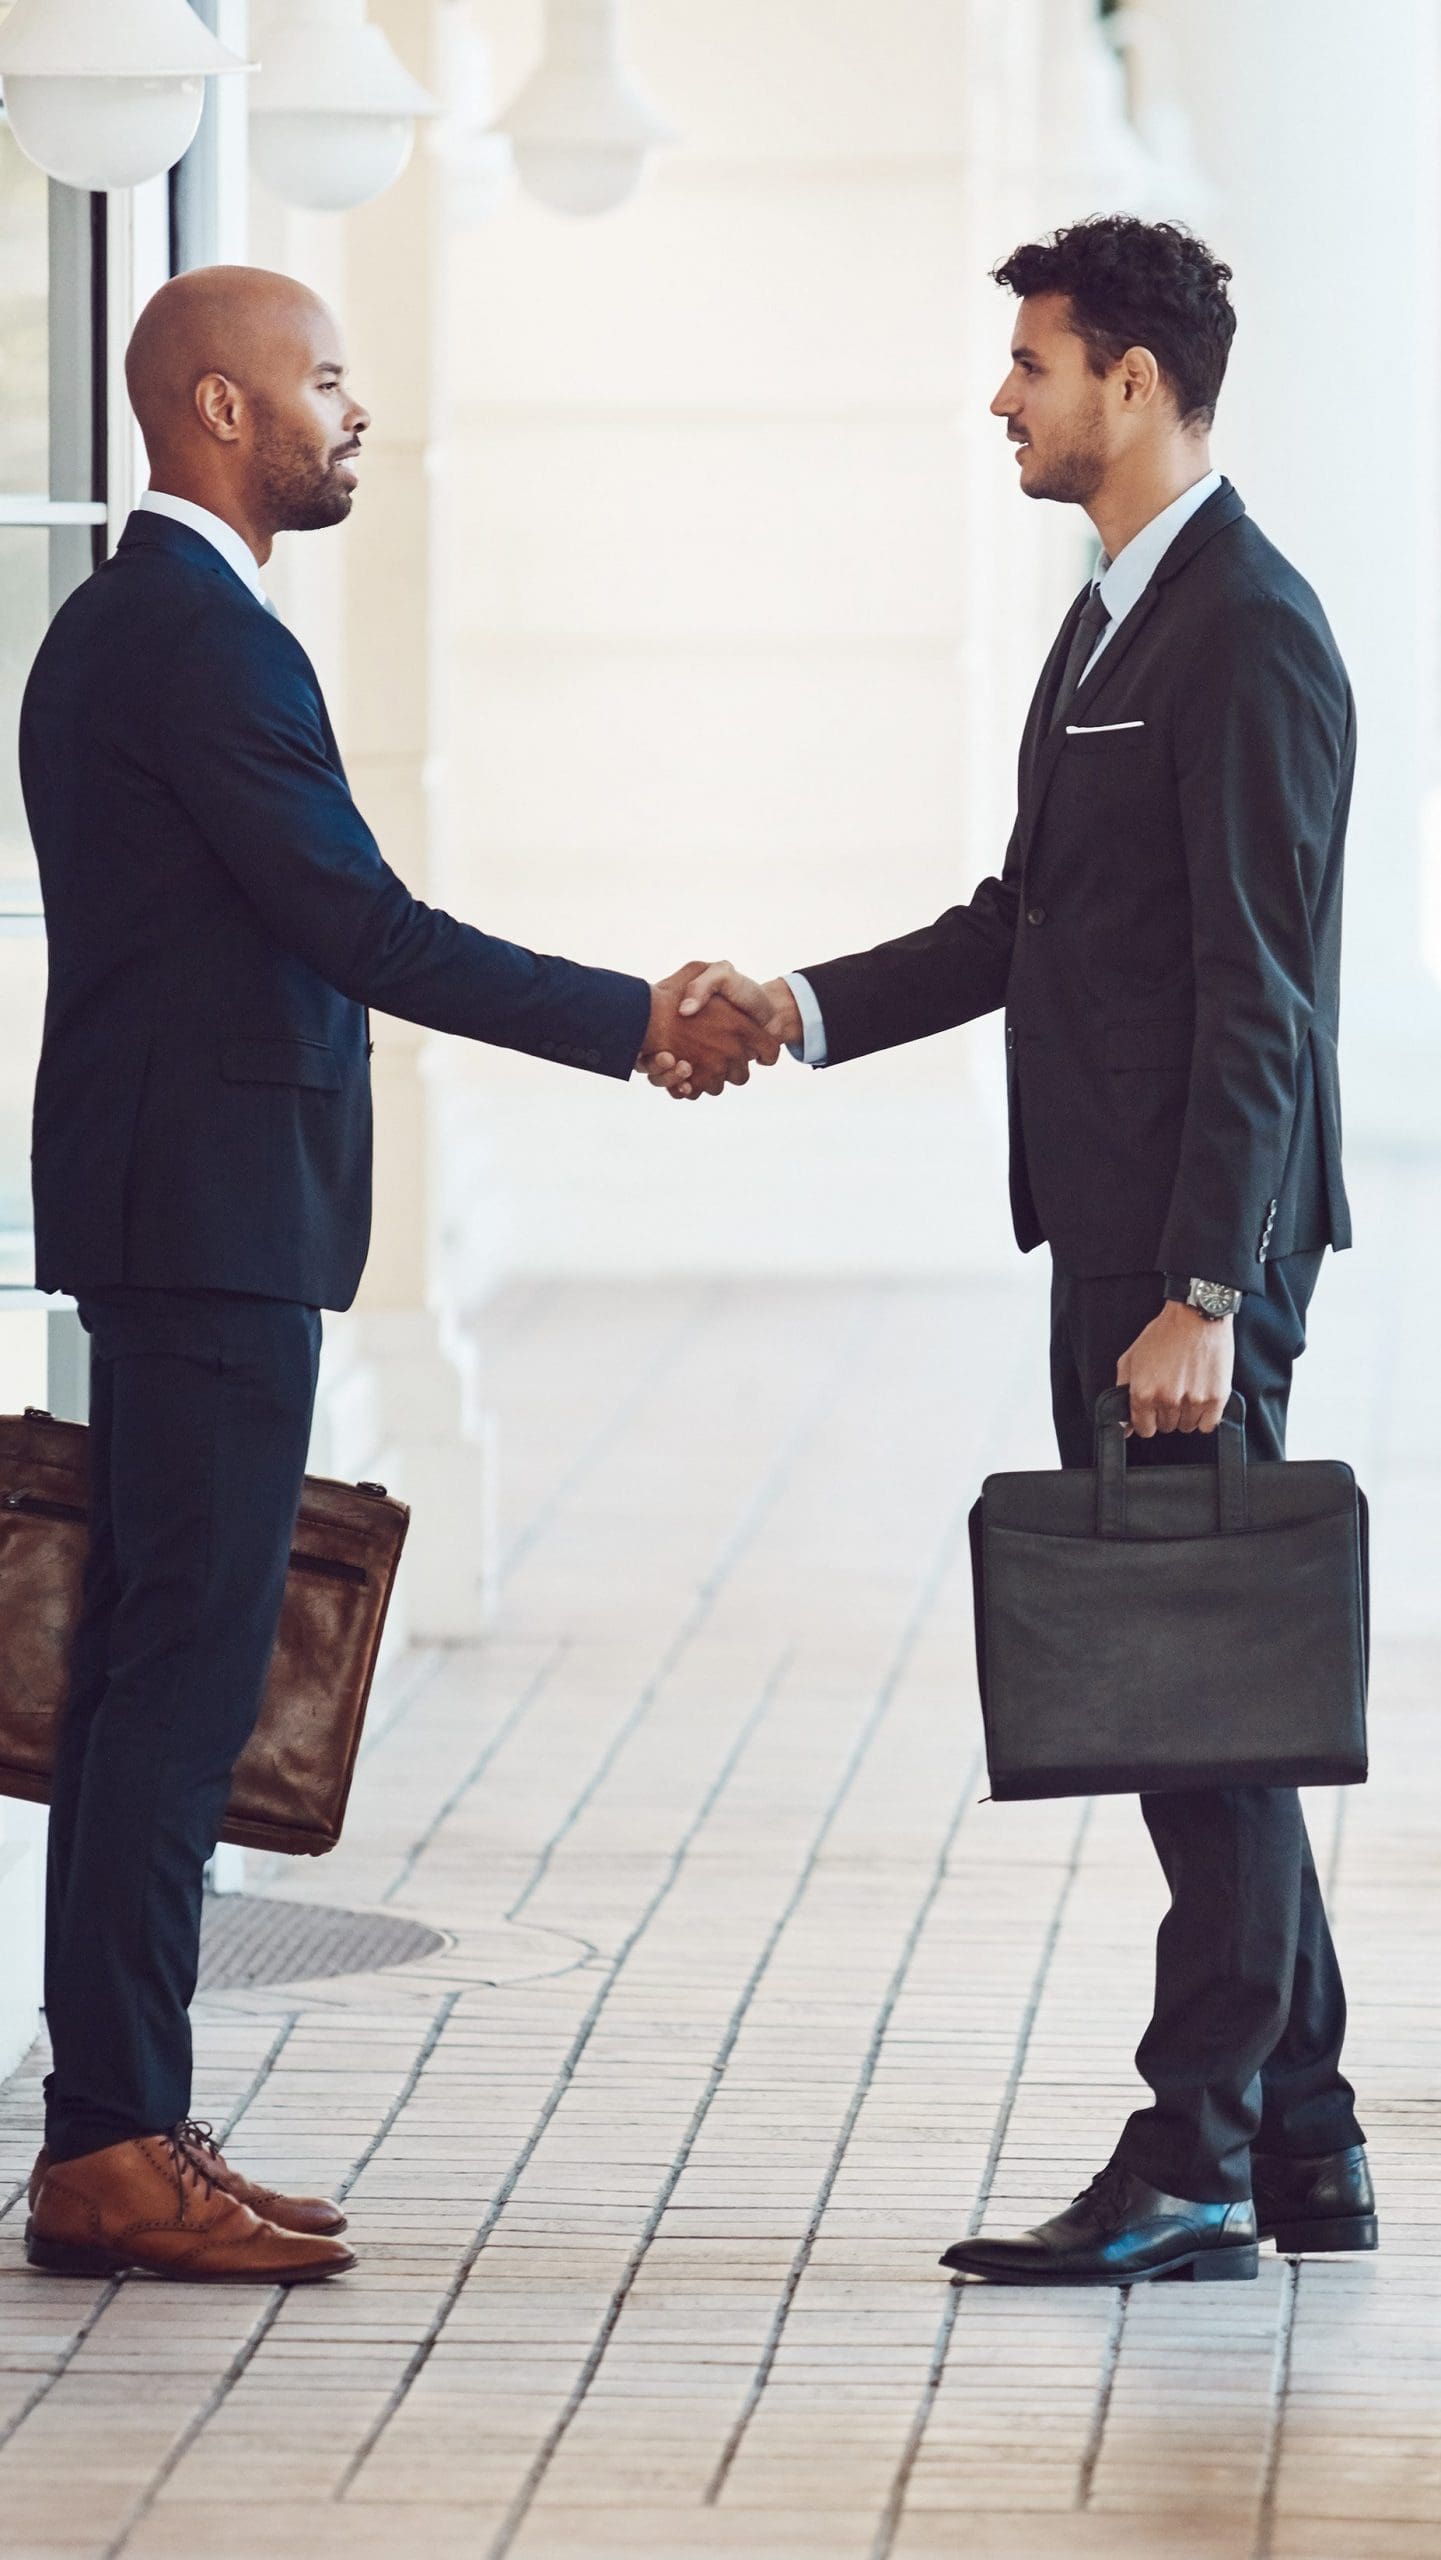 Two men shaking hands, business agreement